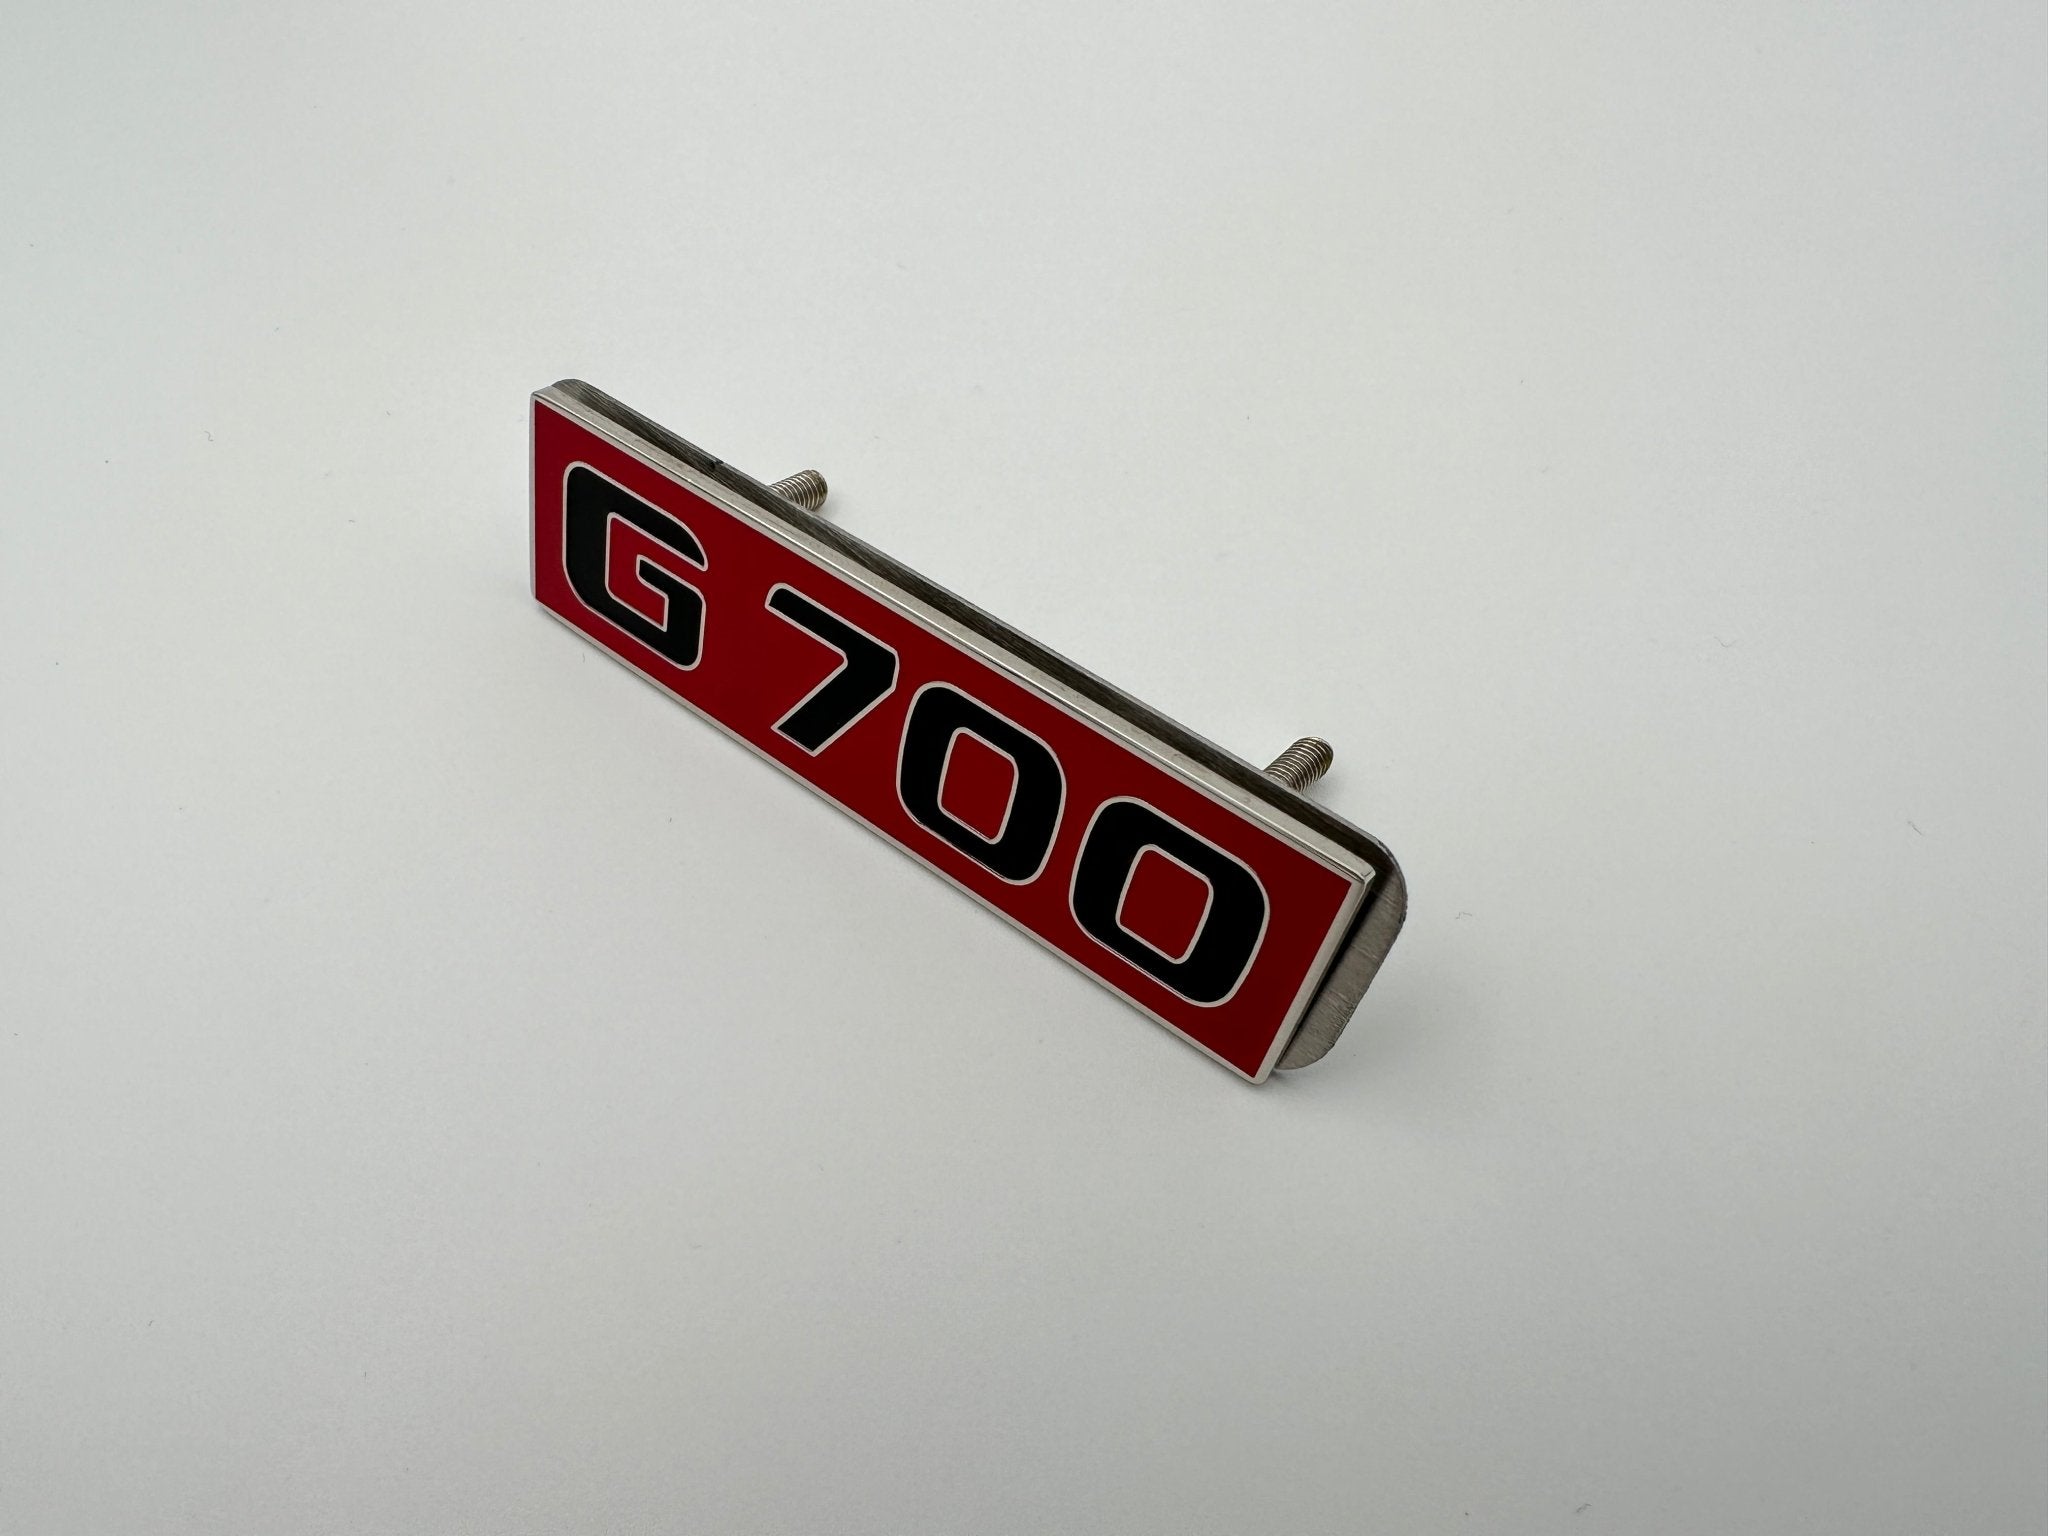 Metal G700 Red Emblem for Mercedes-Benz front grille G-Class W463